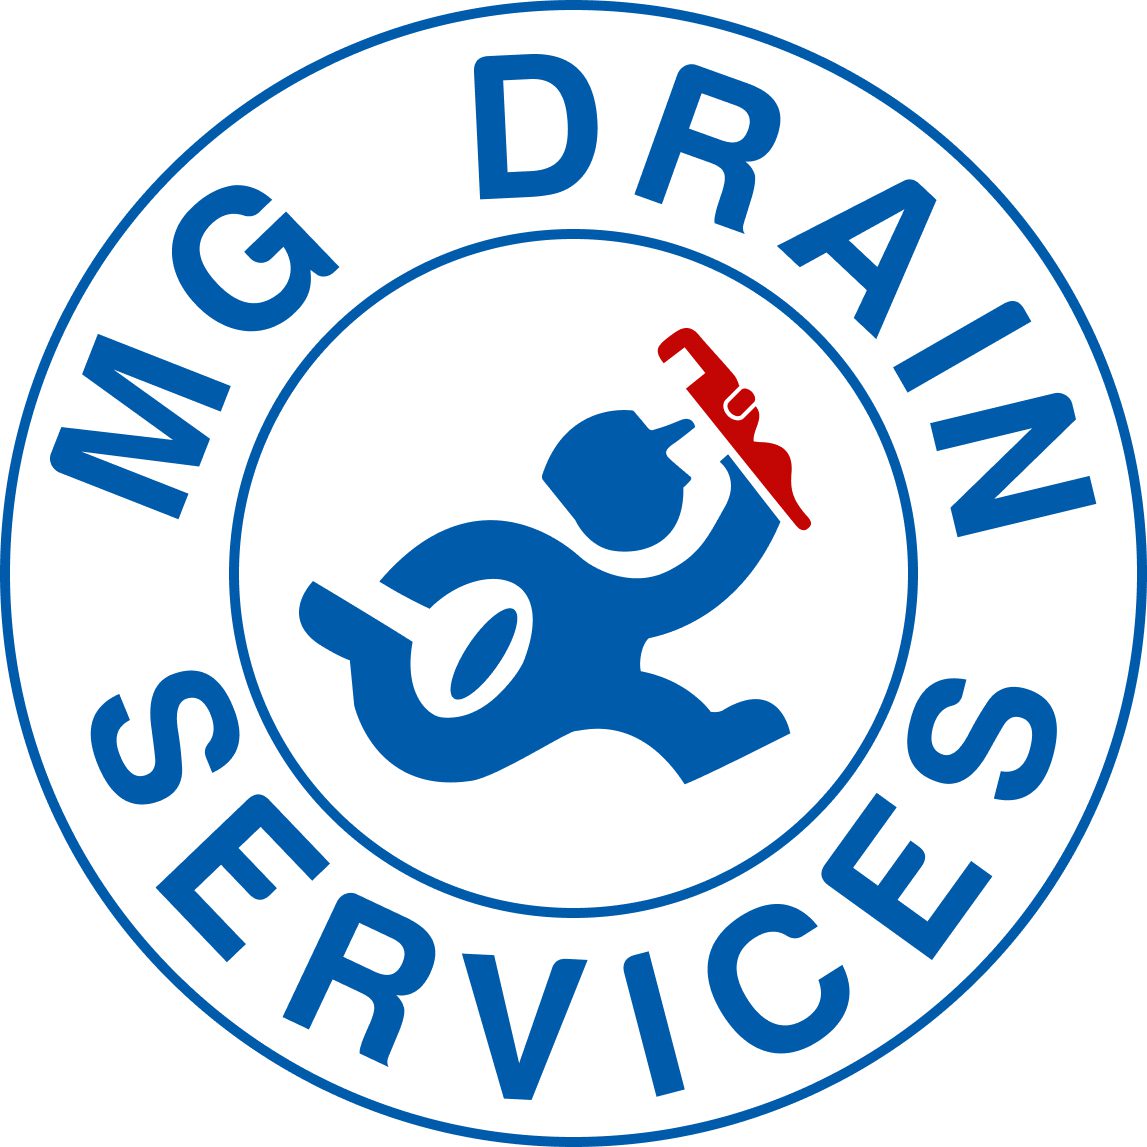 MG Drain Services